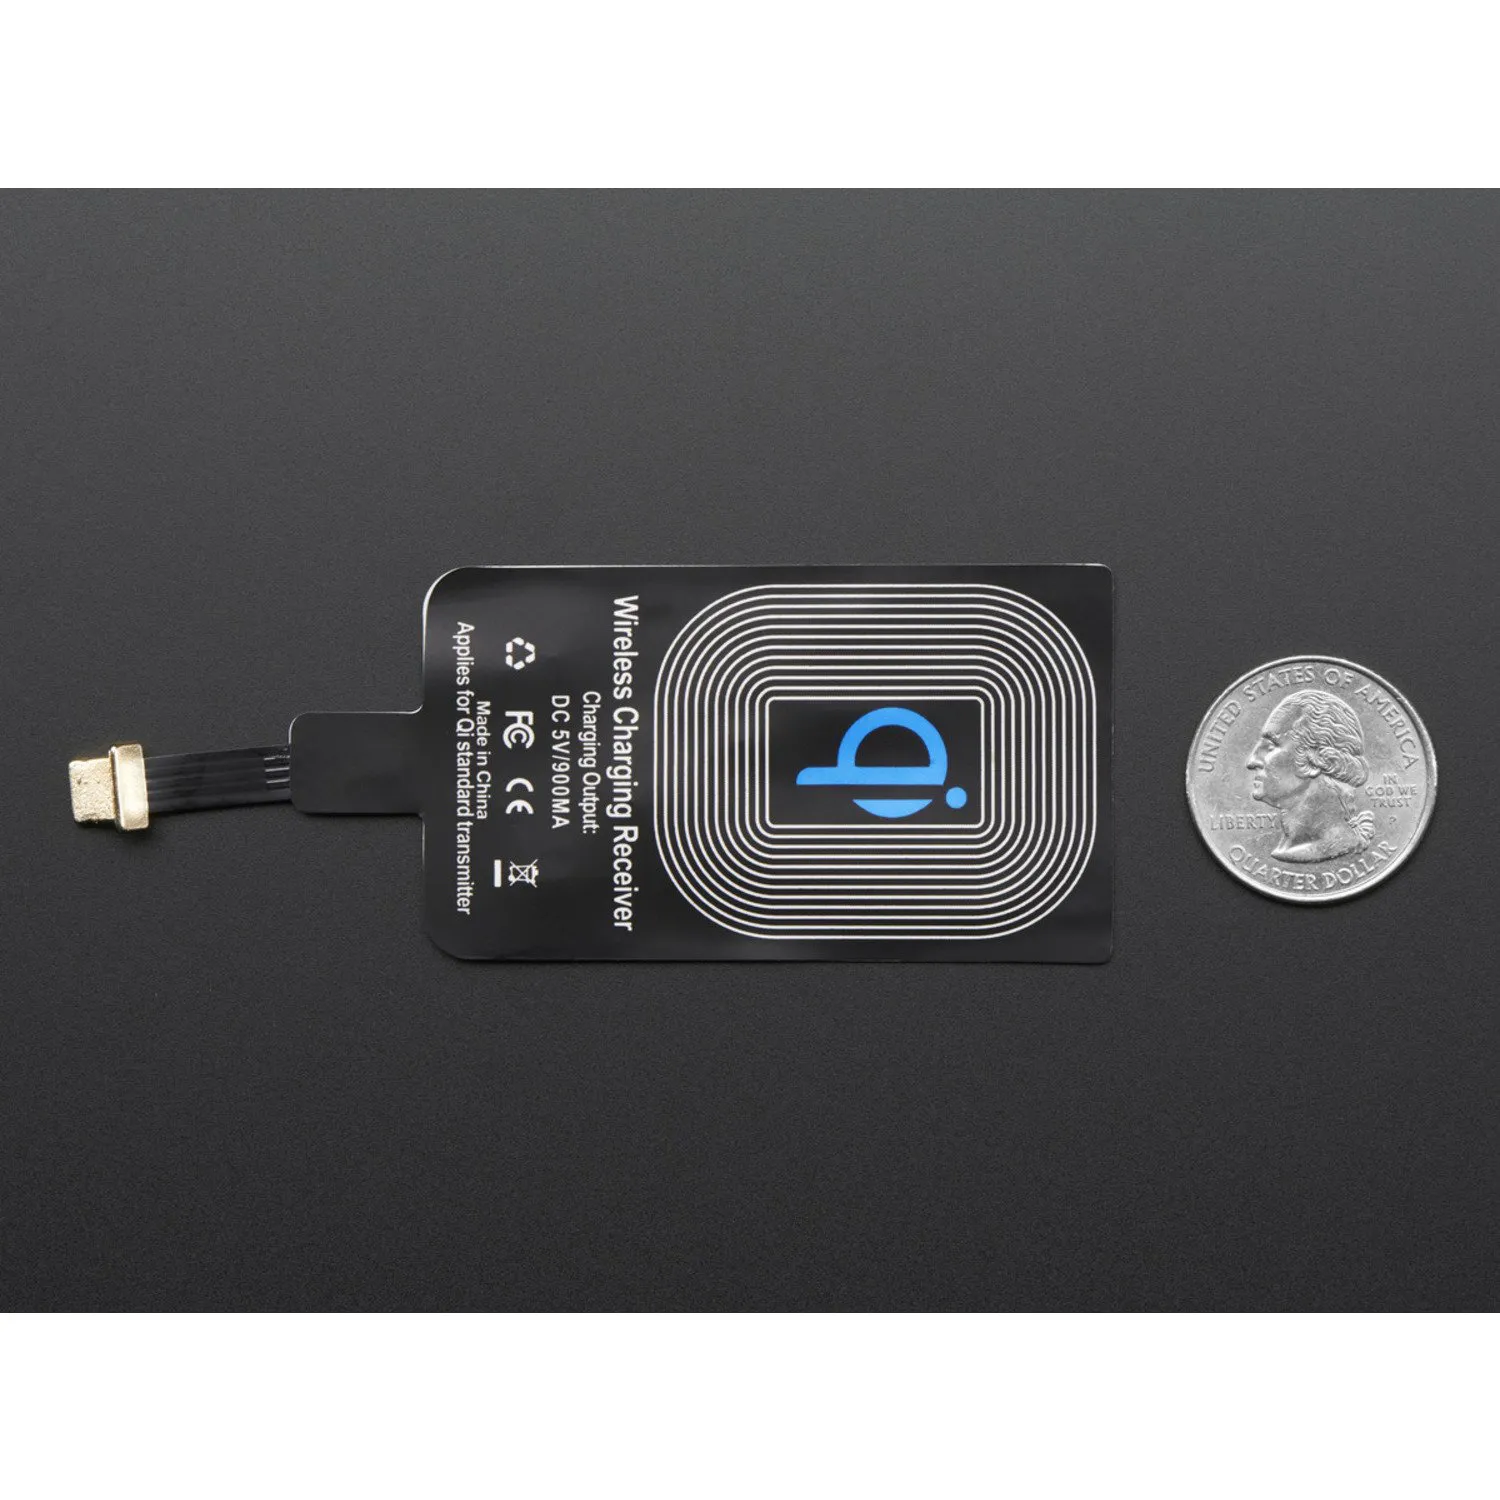 Photo of Qi Wireless Charging Module - 20mm - Lightning Connector